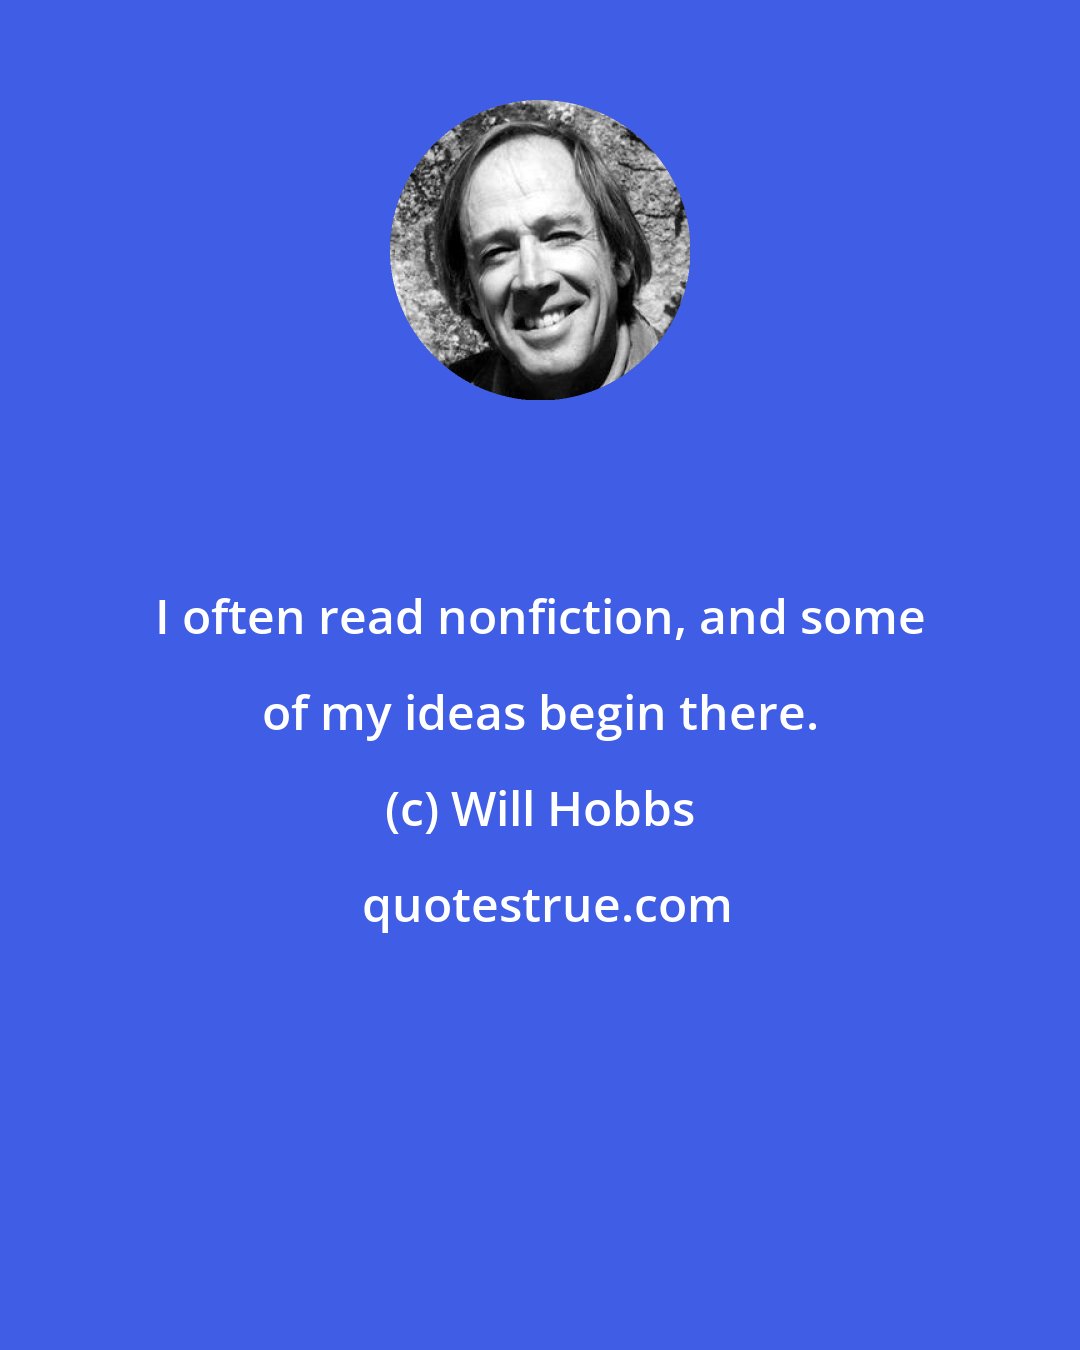 Will Hobbs: I often read nonfiction, and some of my ideas begin there.